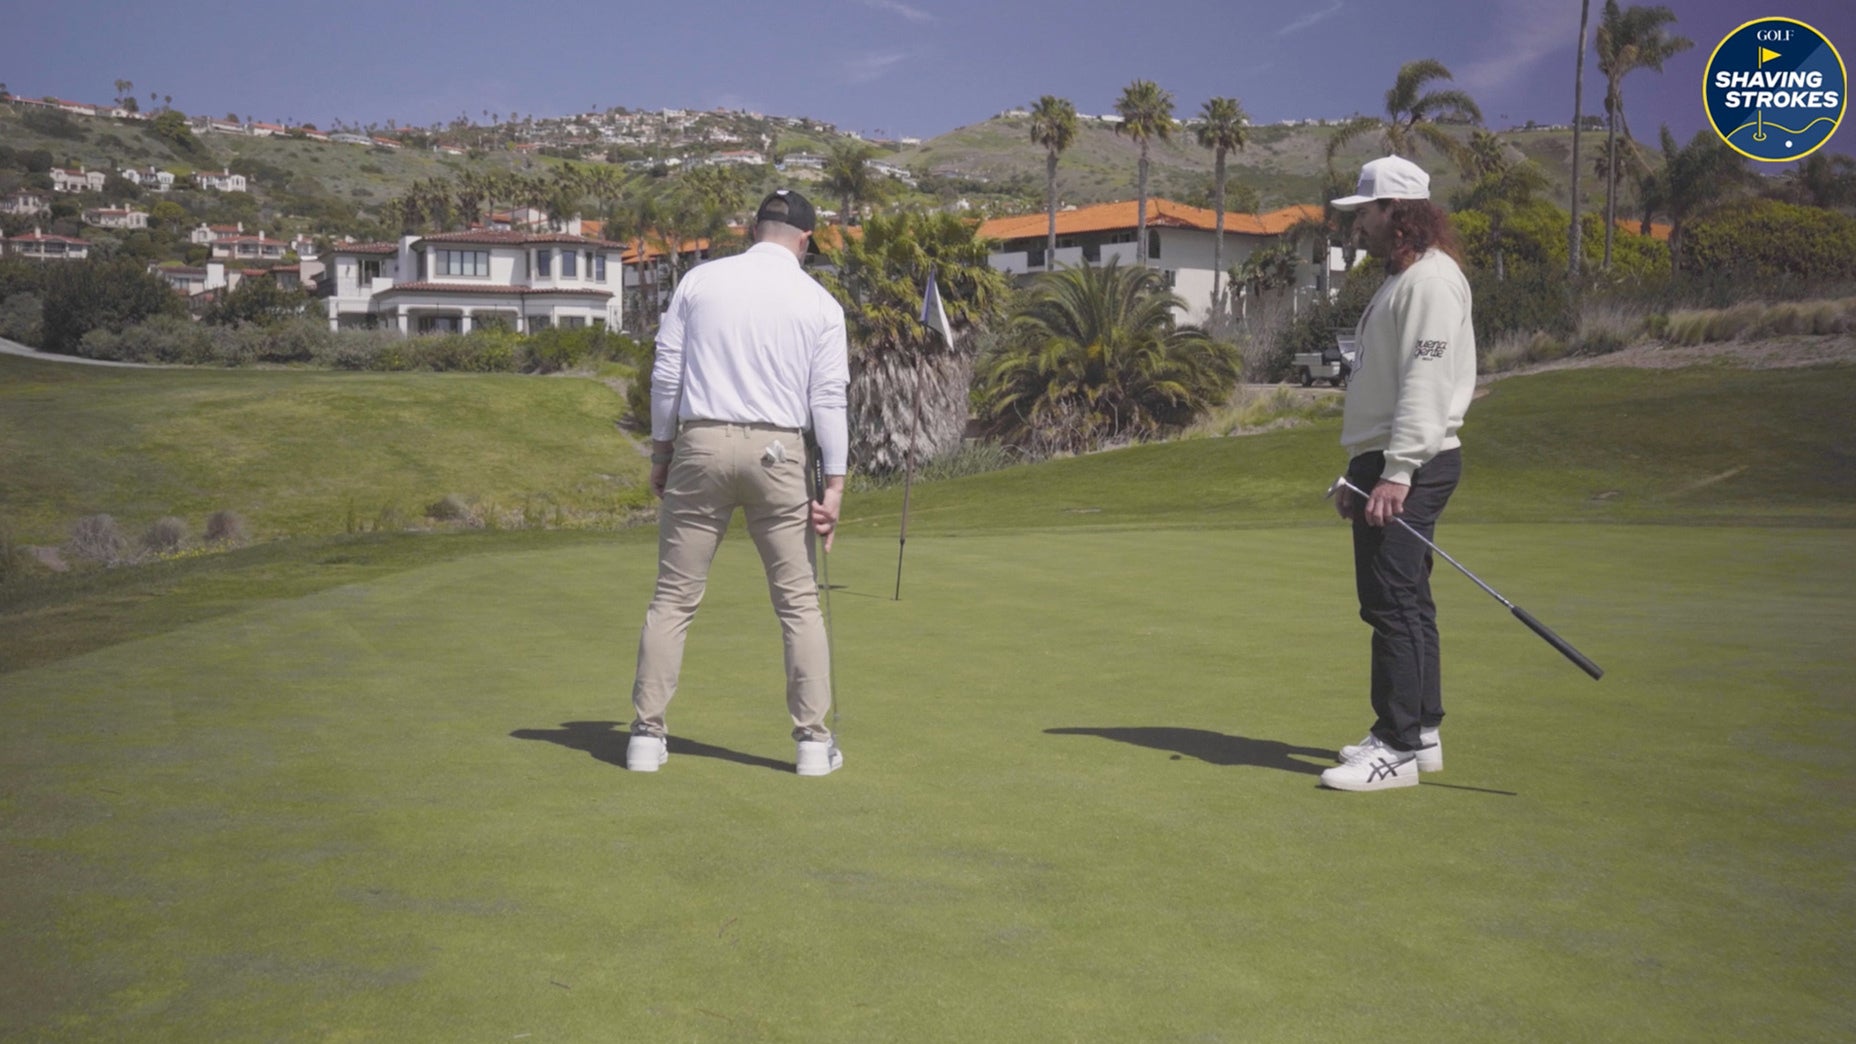 Cleveland Golf ambassador Jake Hutt shares his tips on how to use your feet to improve your green-reading and leave putts closer to the pin